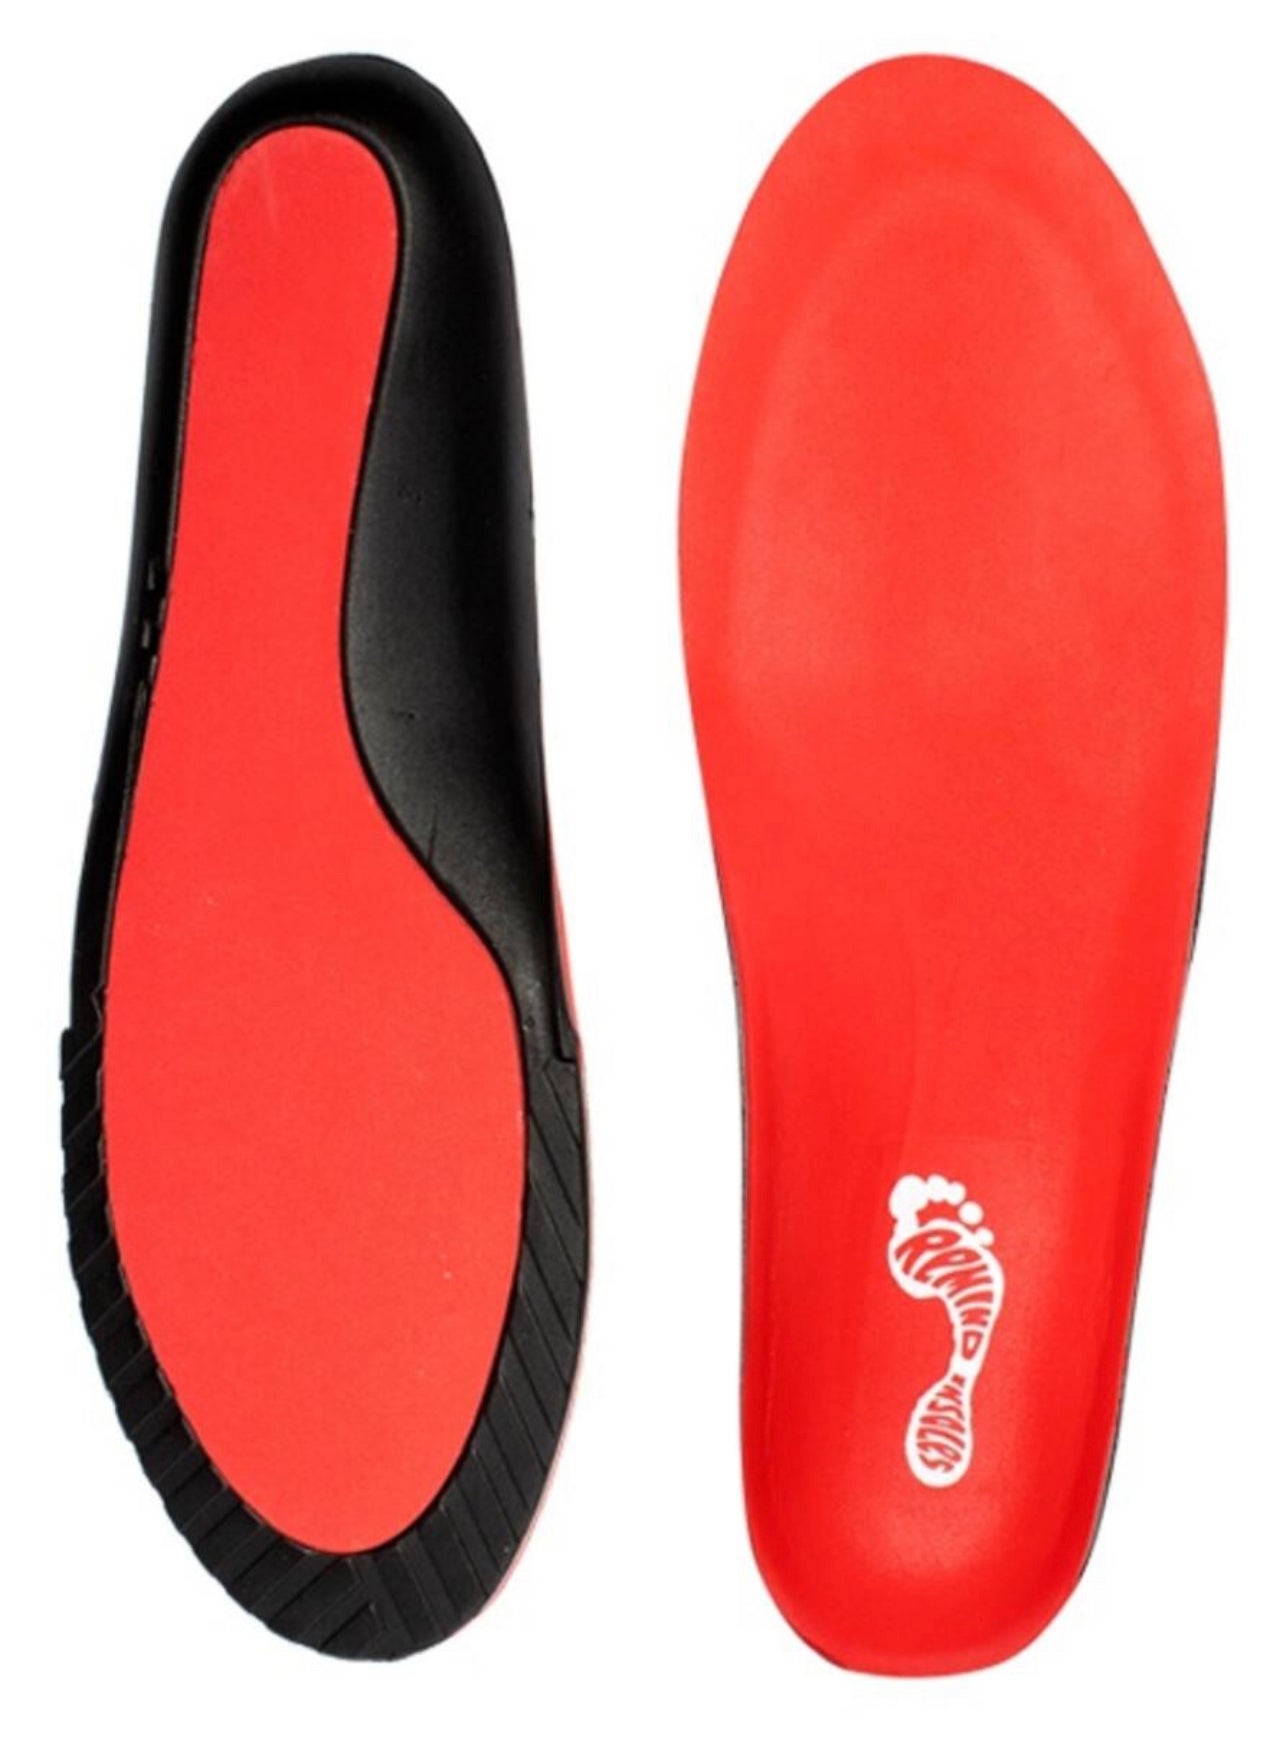 Remind Insoles - REMEDY Heat Moldable